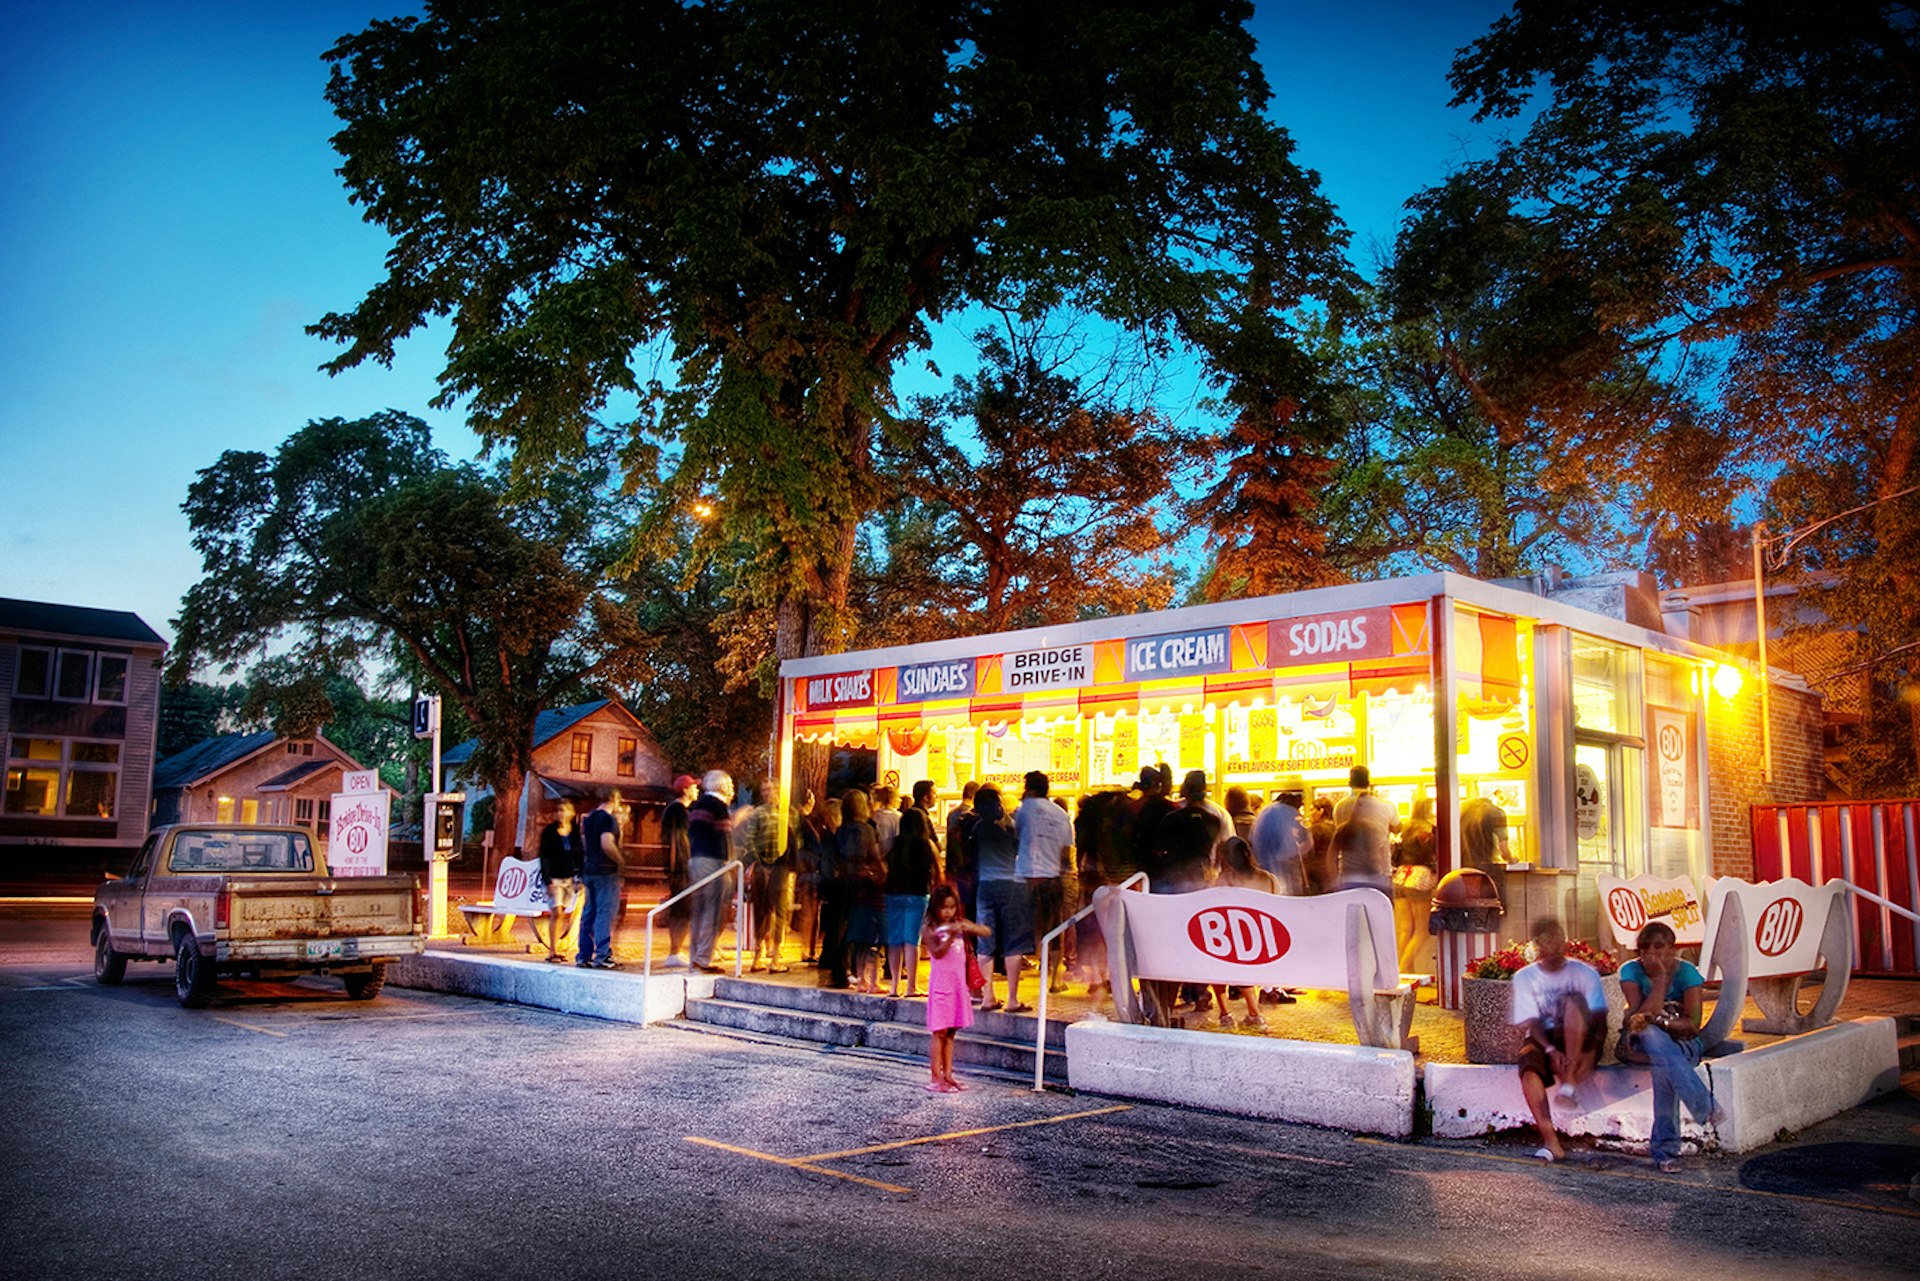 A crowd lines up outside BDI (Bridge Drive In). Image by Bryan Scott / Photo courtesy of Tourism Winnipeg